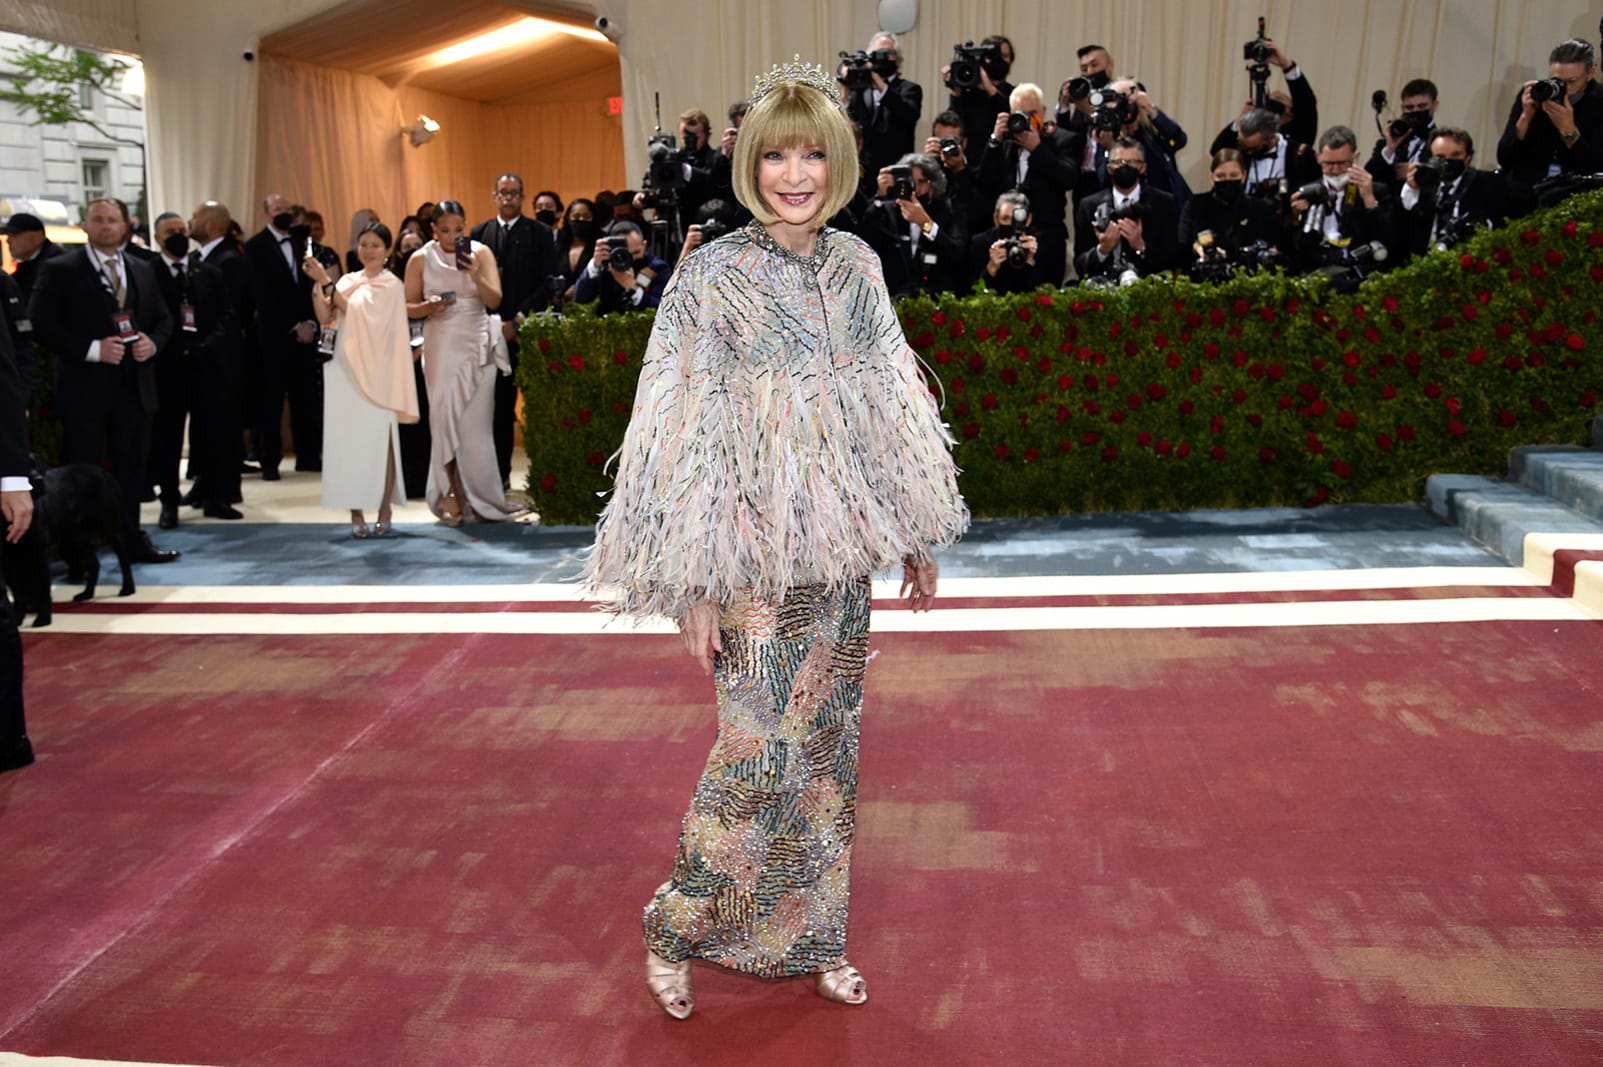 Vogue's Anna Wintour chose Chanel haute couture by Virginie Viard for the evening, but her outfit has a personal touch: a tiara from 1910 that's a family heirloom. 